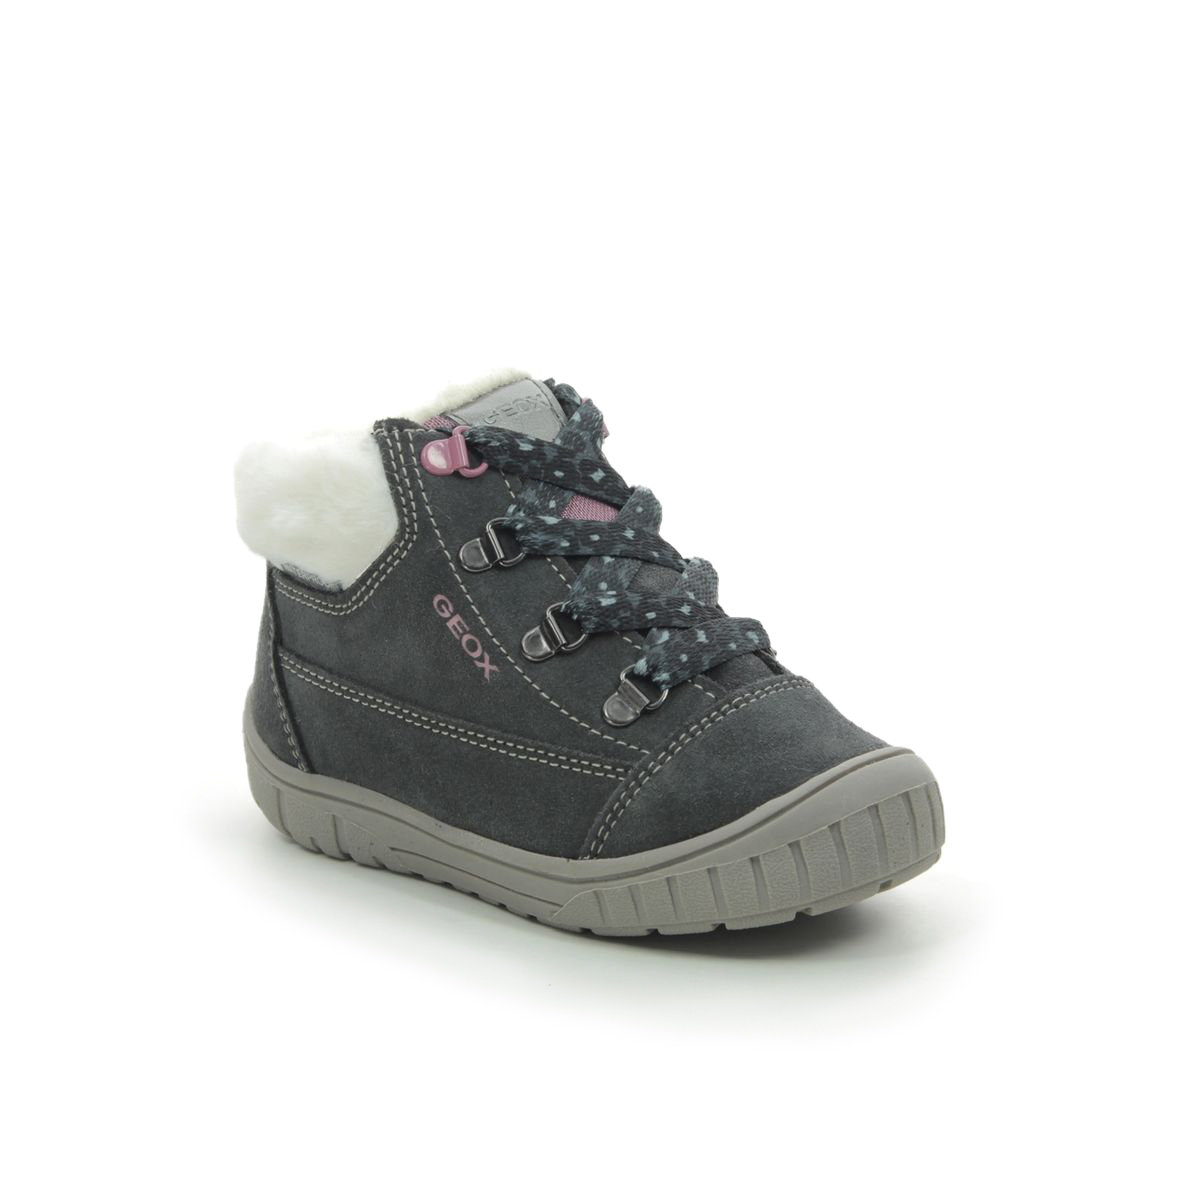 Geox Baby Omar Tex Grey suede Kids Toddler Girls Boots B842LA-C9017 in a Plain Leather in Size 25